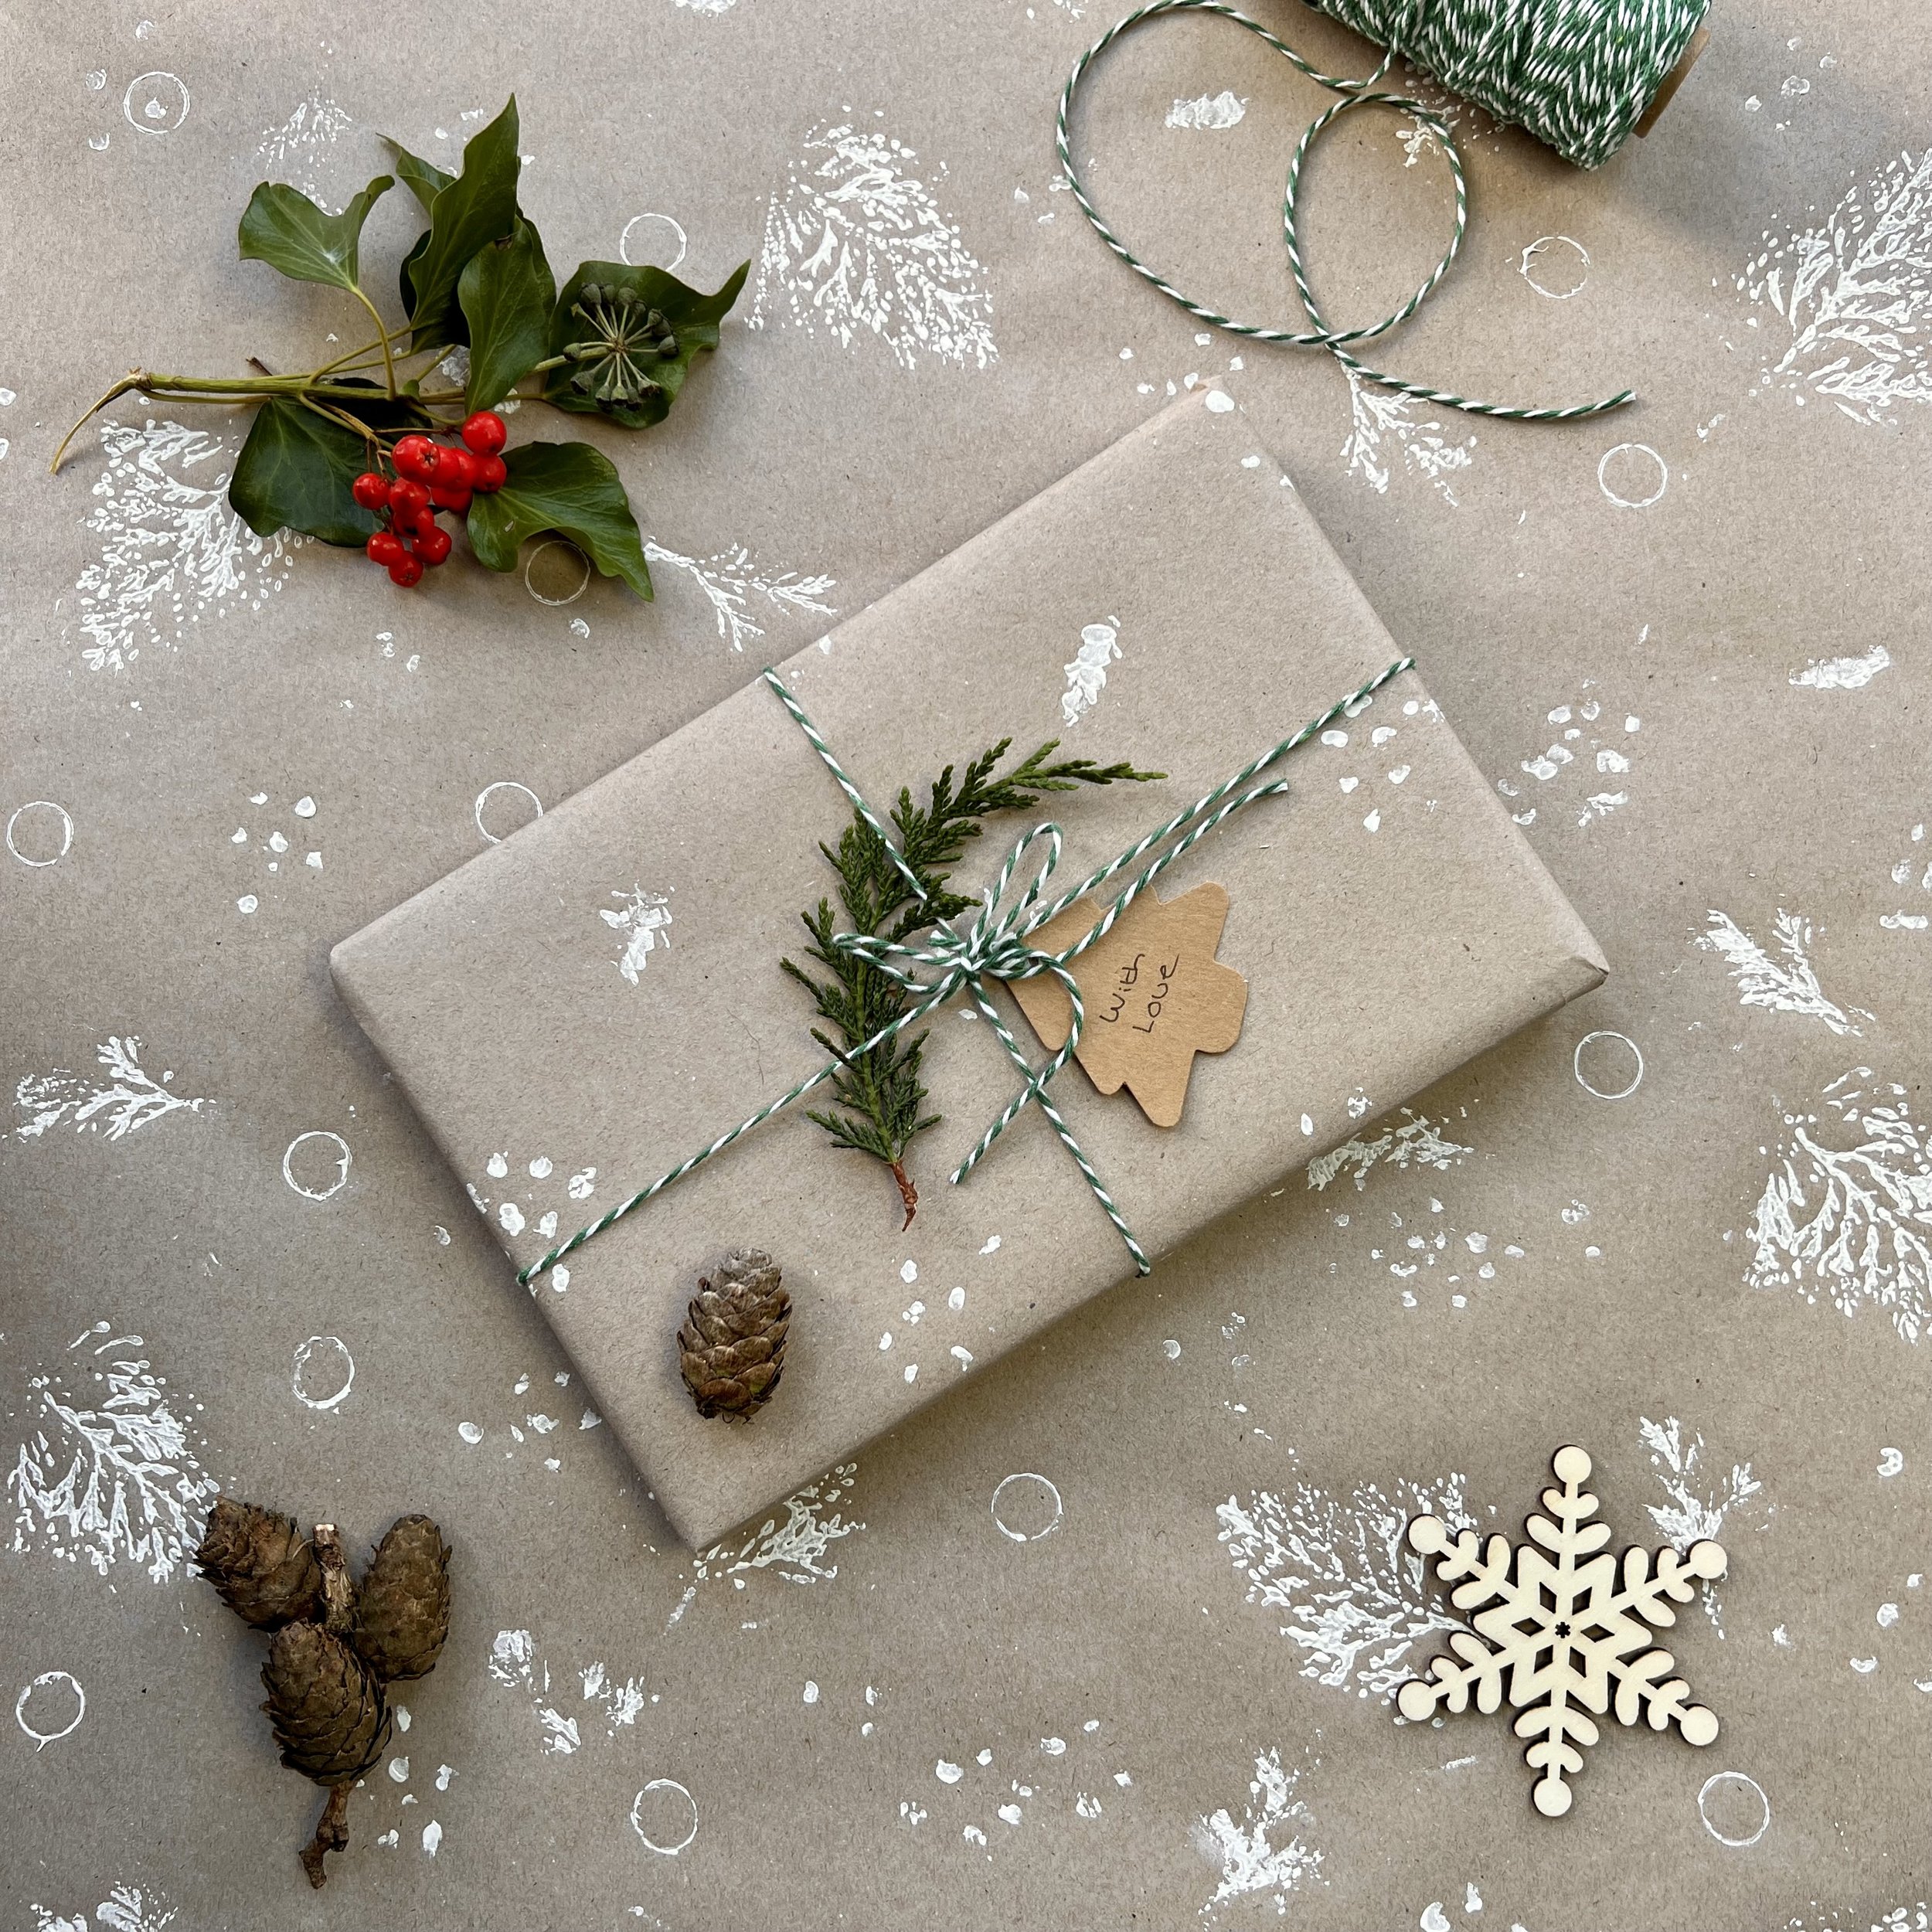 Eco Christmas Wrapping Paper: 4 Ways to Make Your Own